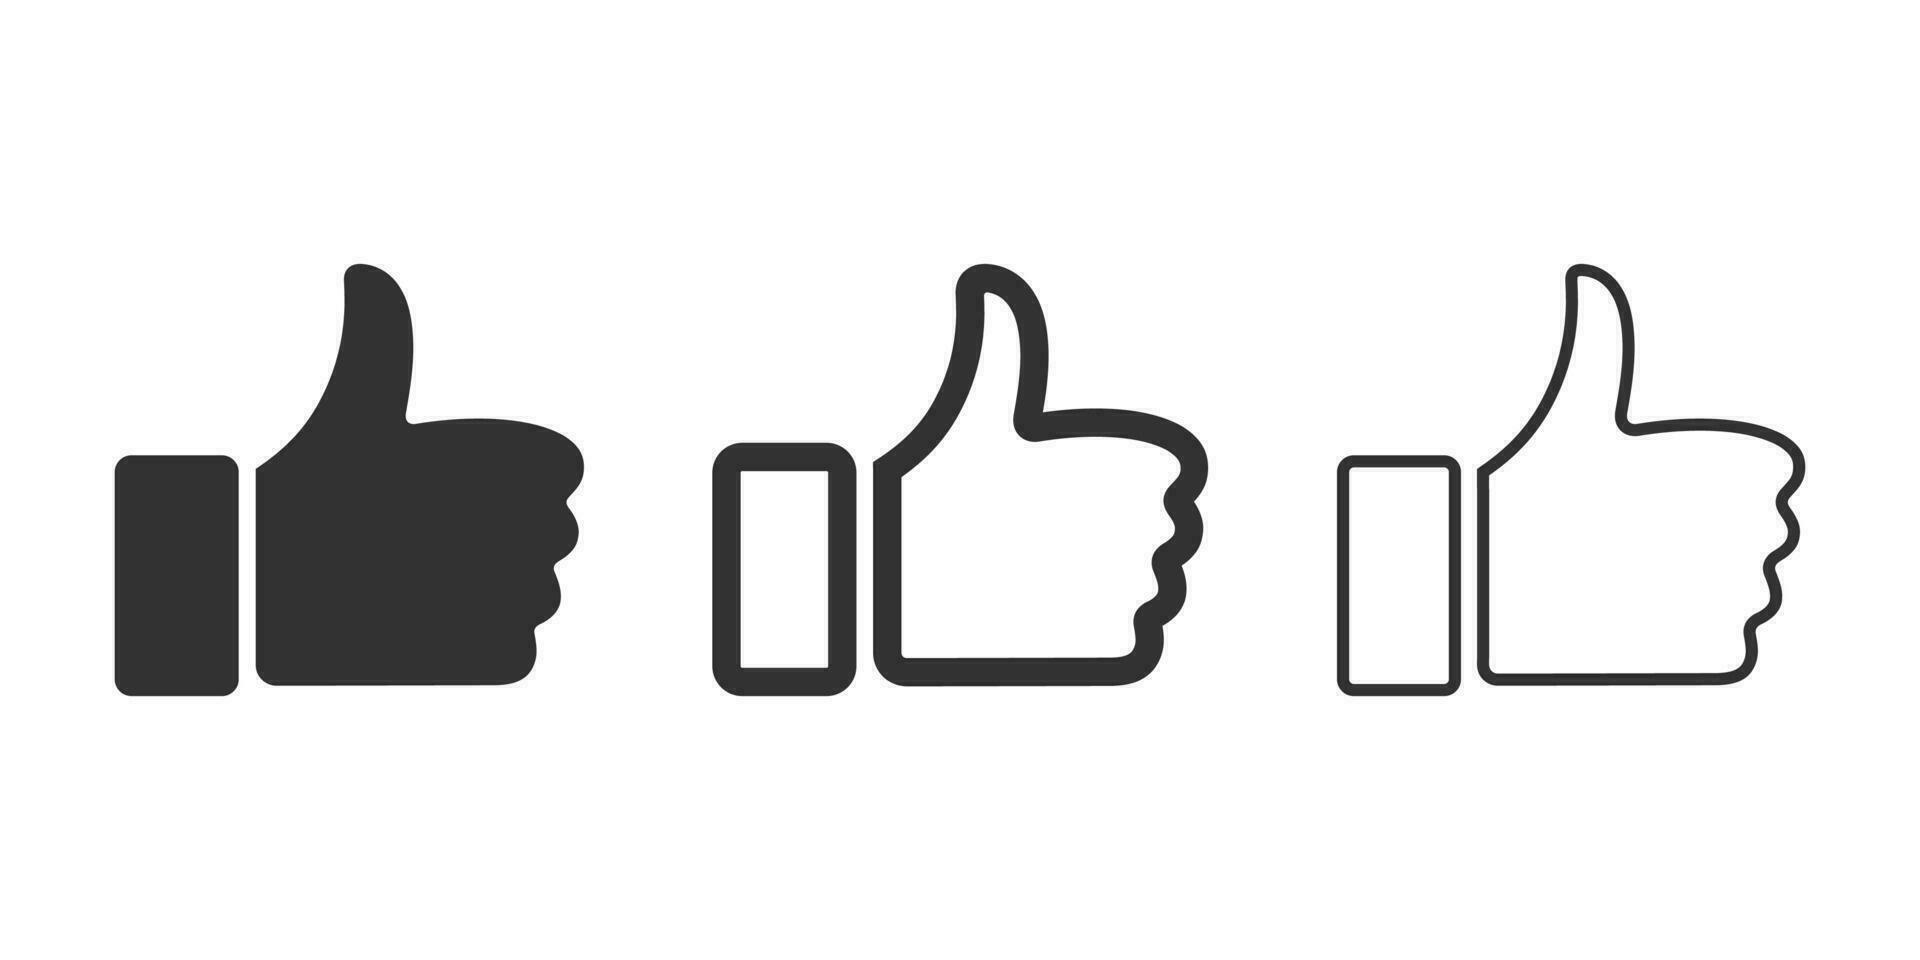 Thumbs up icon set. Thumb up line icons. Vector illustration